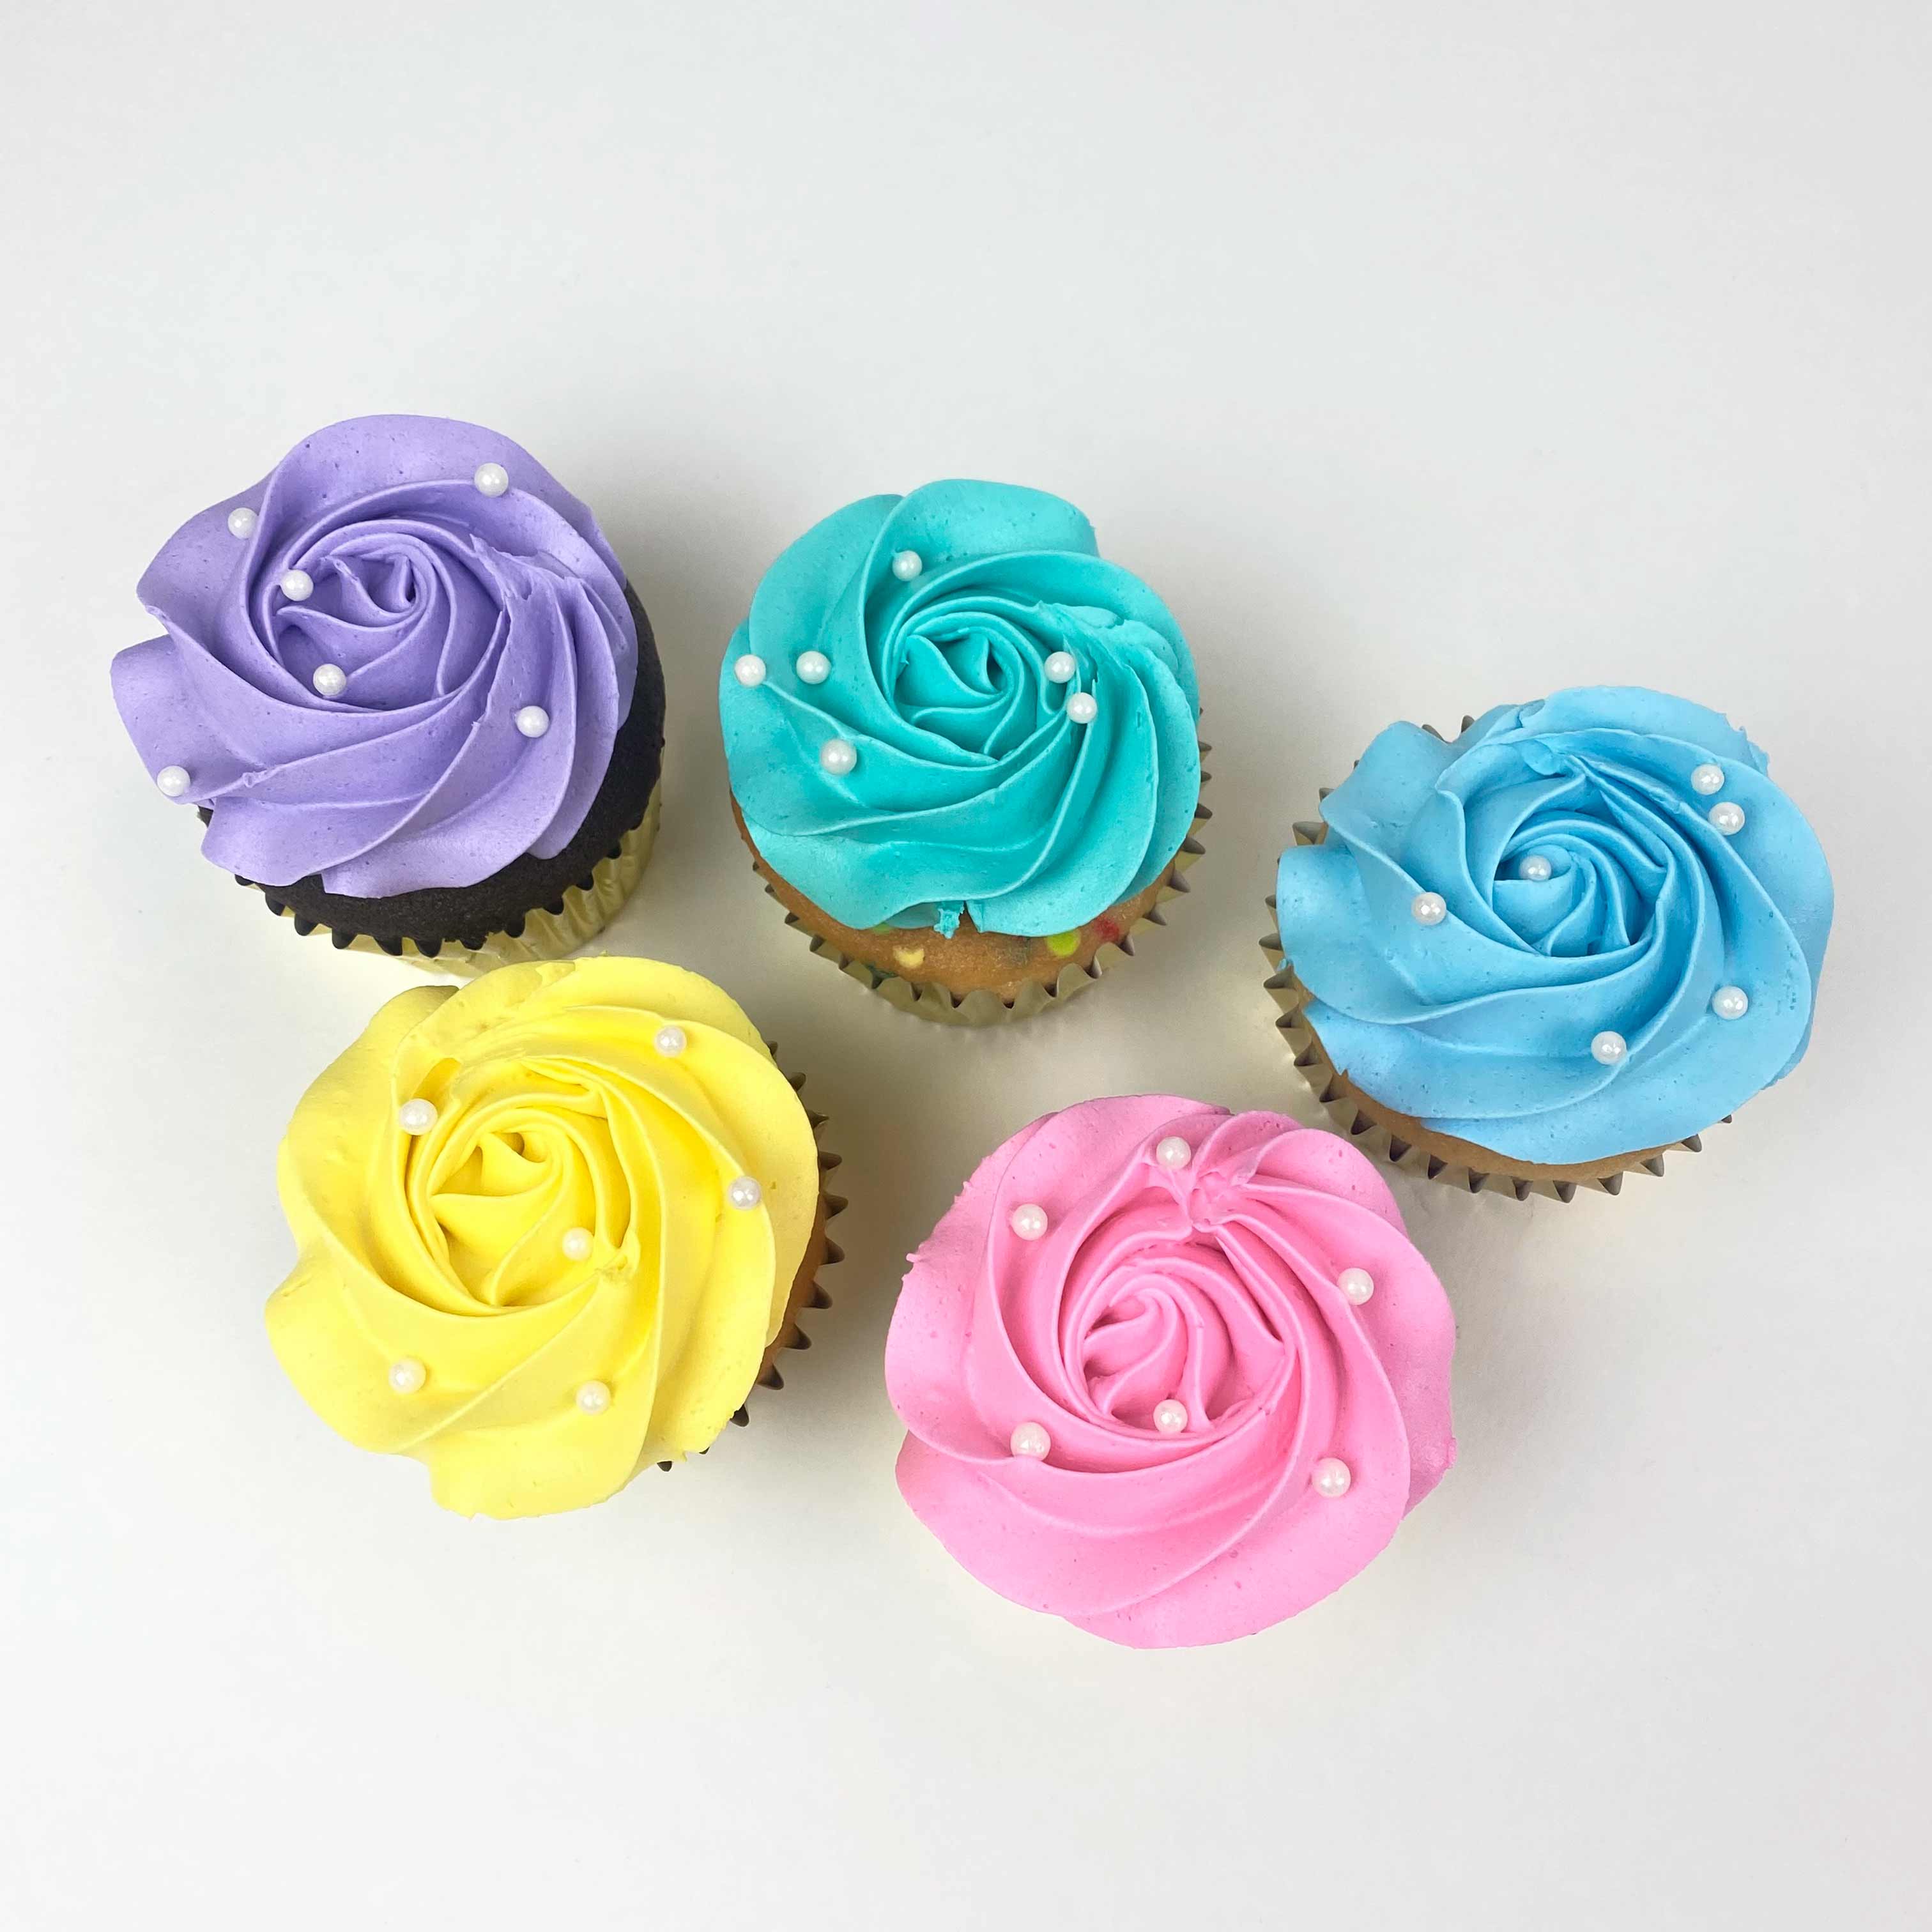 Rosette Cupcakes With White Pearls. Choice of Lavender, Aqua, Blue, Yellow or Pink colors